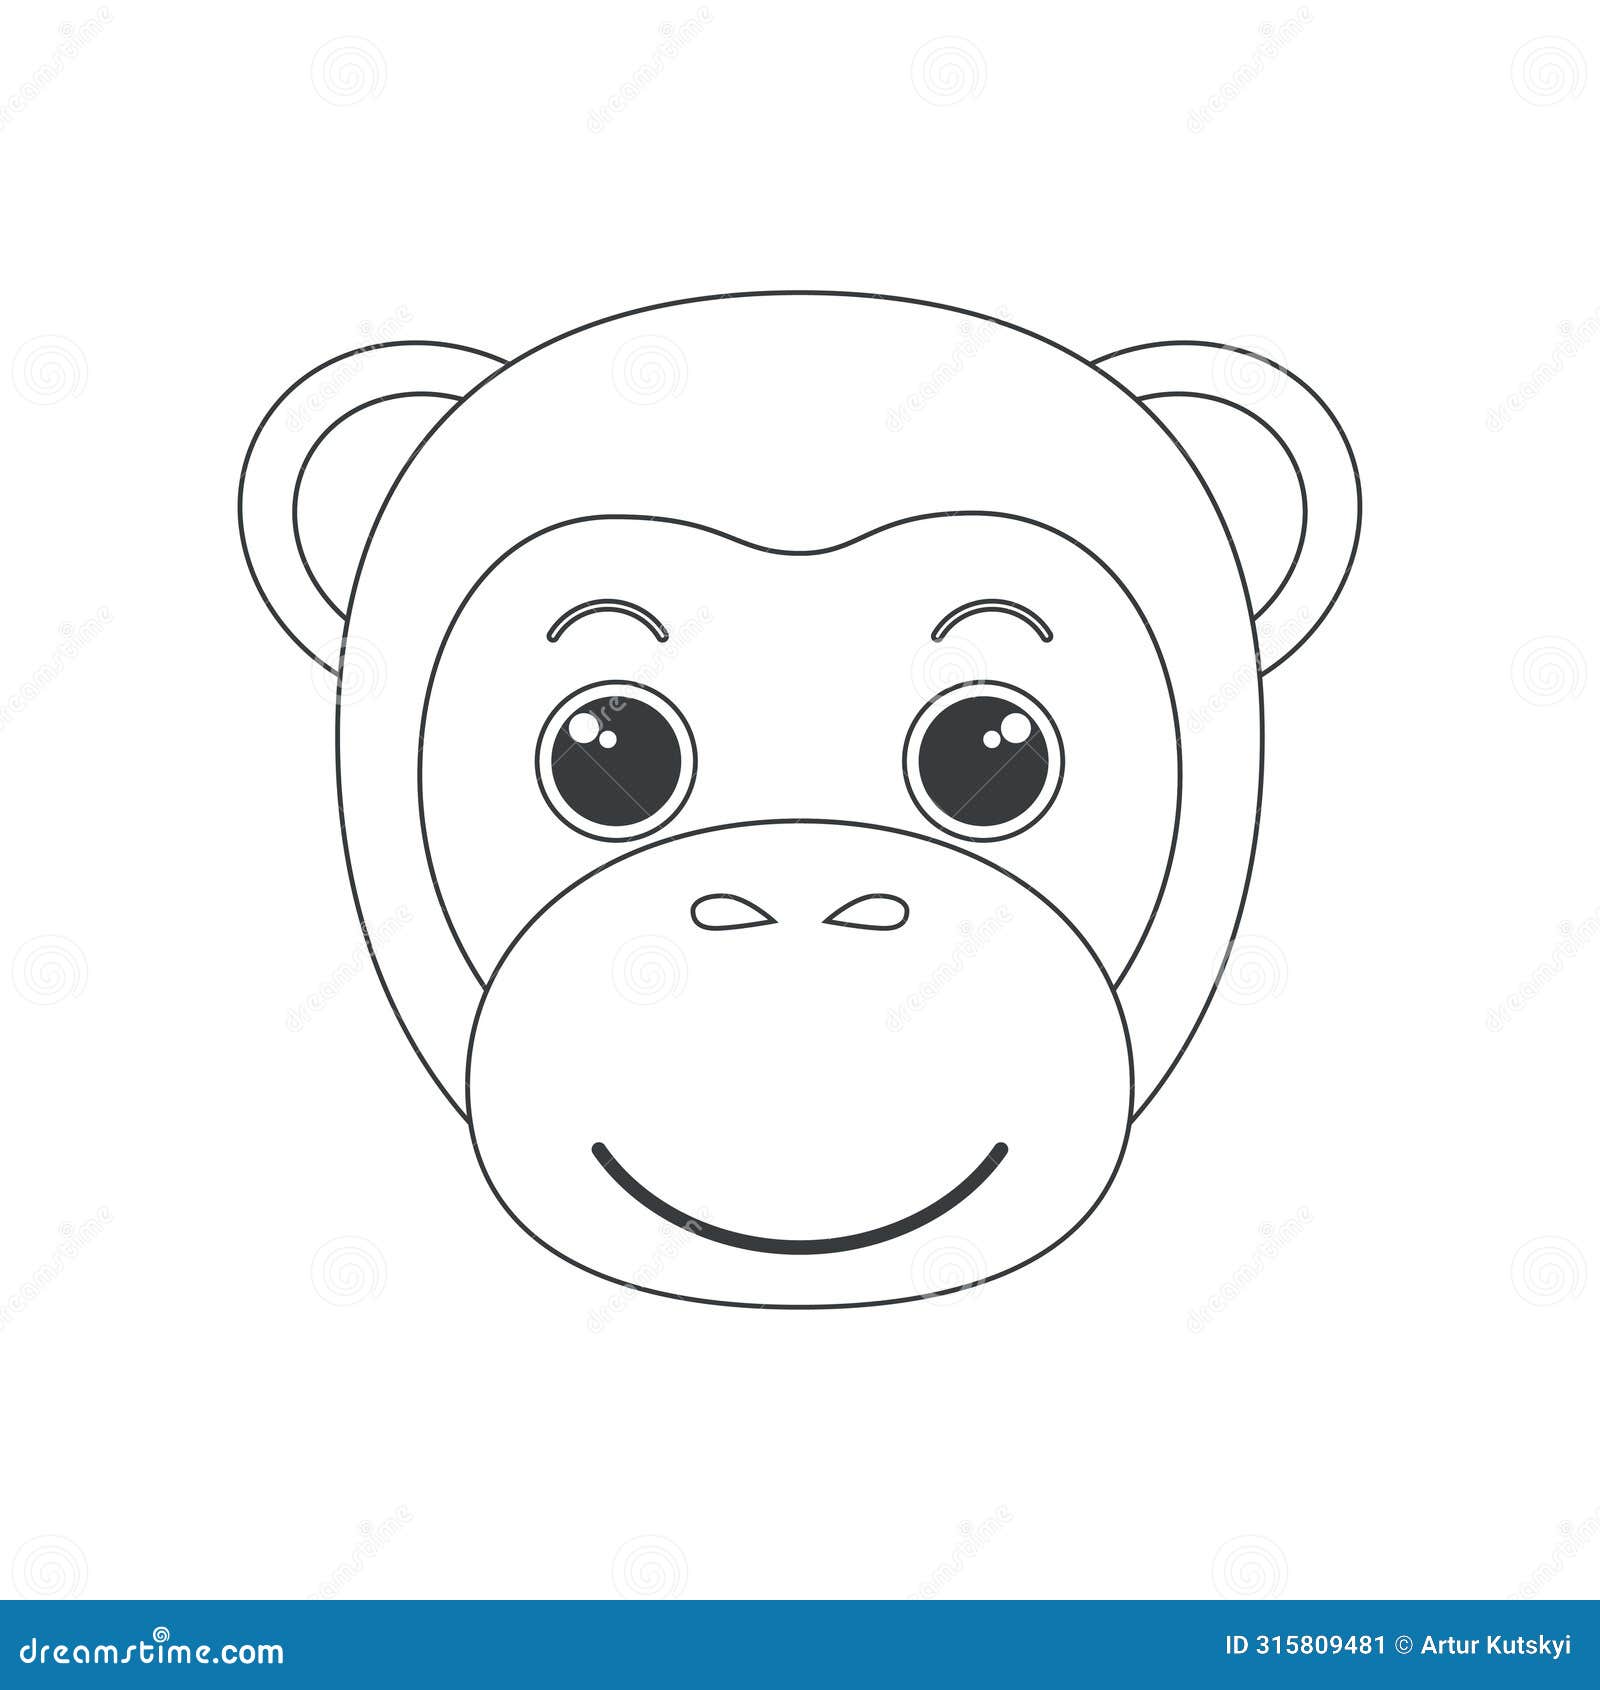 cute monkey muzzle, primate face and head of simple geometric 